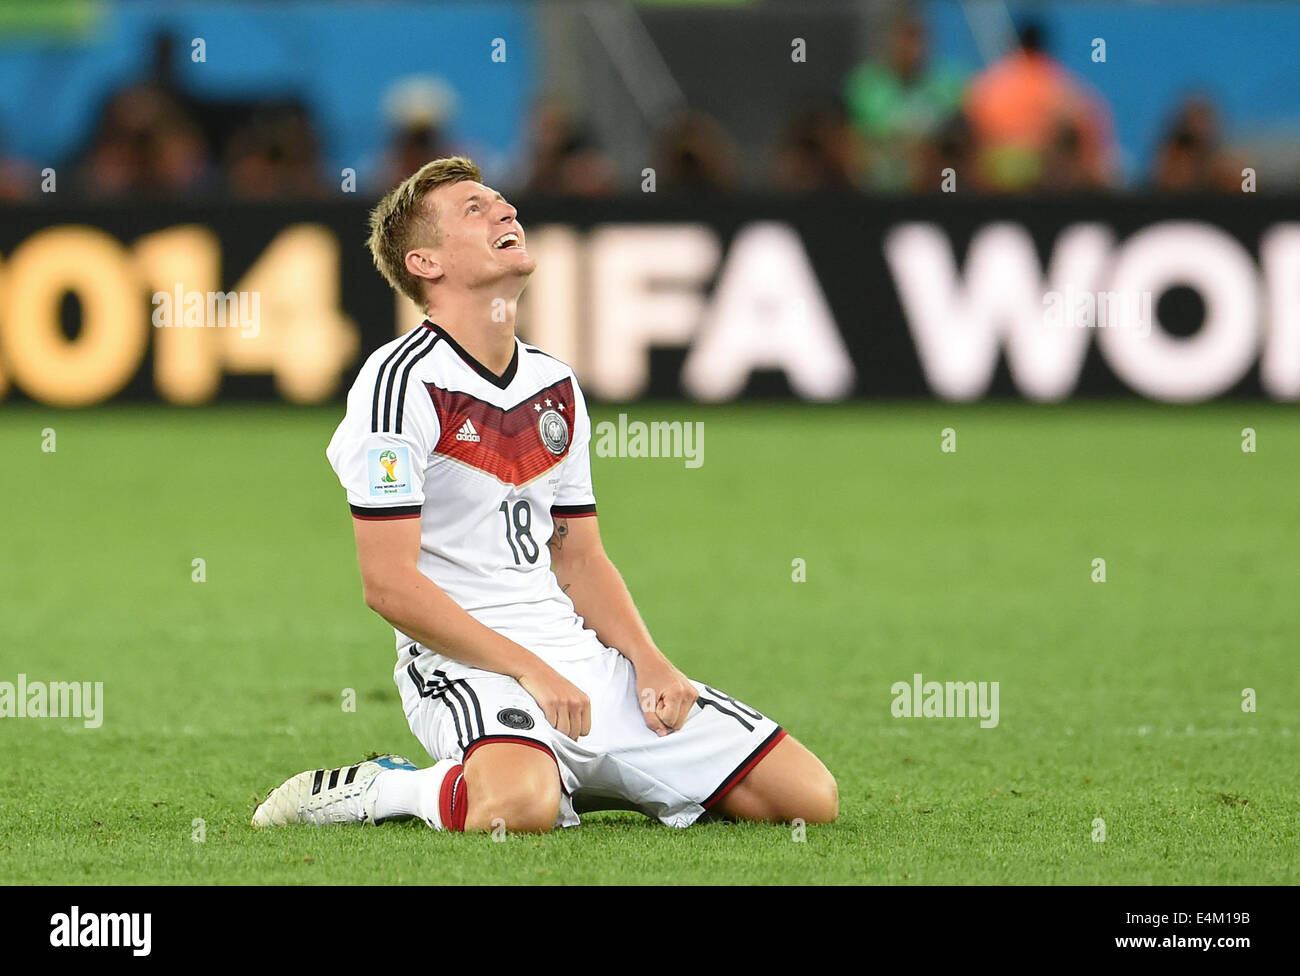 Rio de Janeiro, Brazil. 13th July, 2014. Toni Kroos of Germany celebrates after winning the FIFA World Cup 2014 final soccer match between Germany and Argentina at the Estadio do Maracana in Rio de Janeiro, Brazil, 13 July 2014. Photo: Andreas Gebert/dpa/Alamy Live News Stock Photo